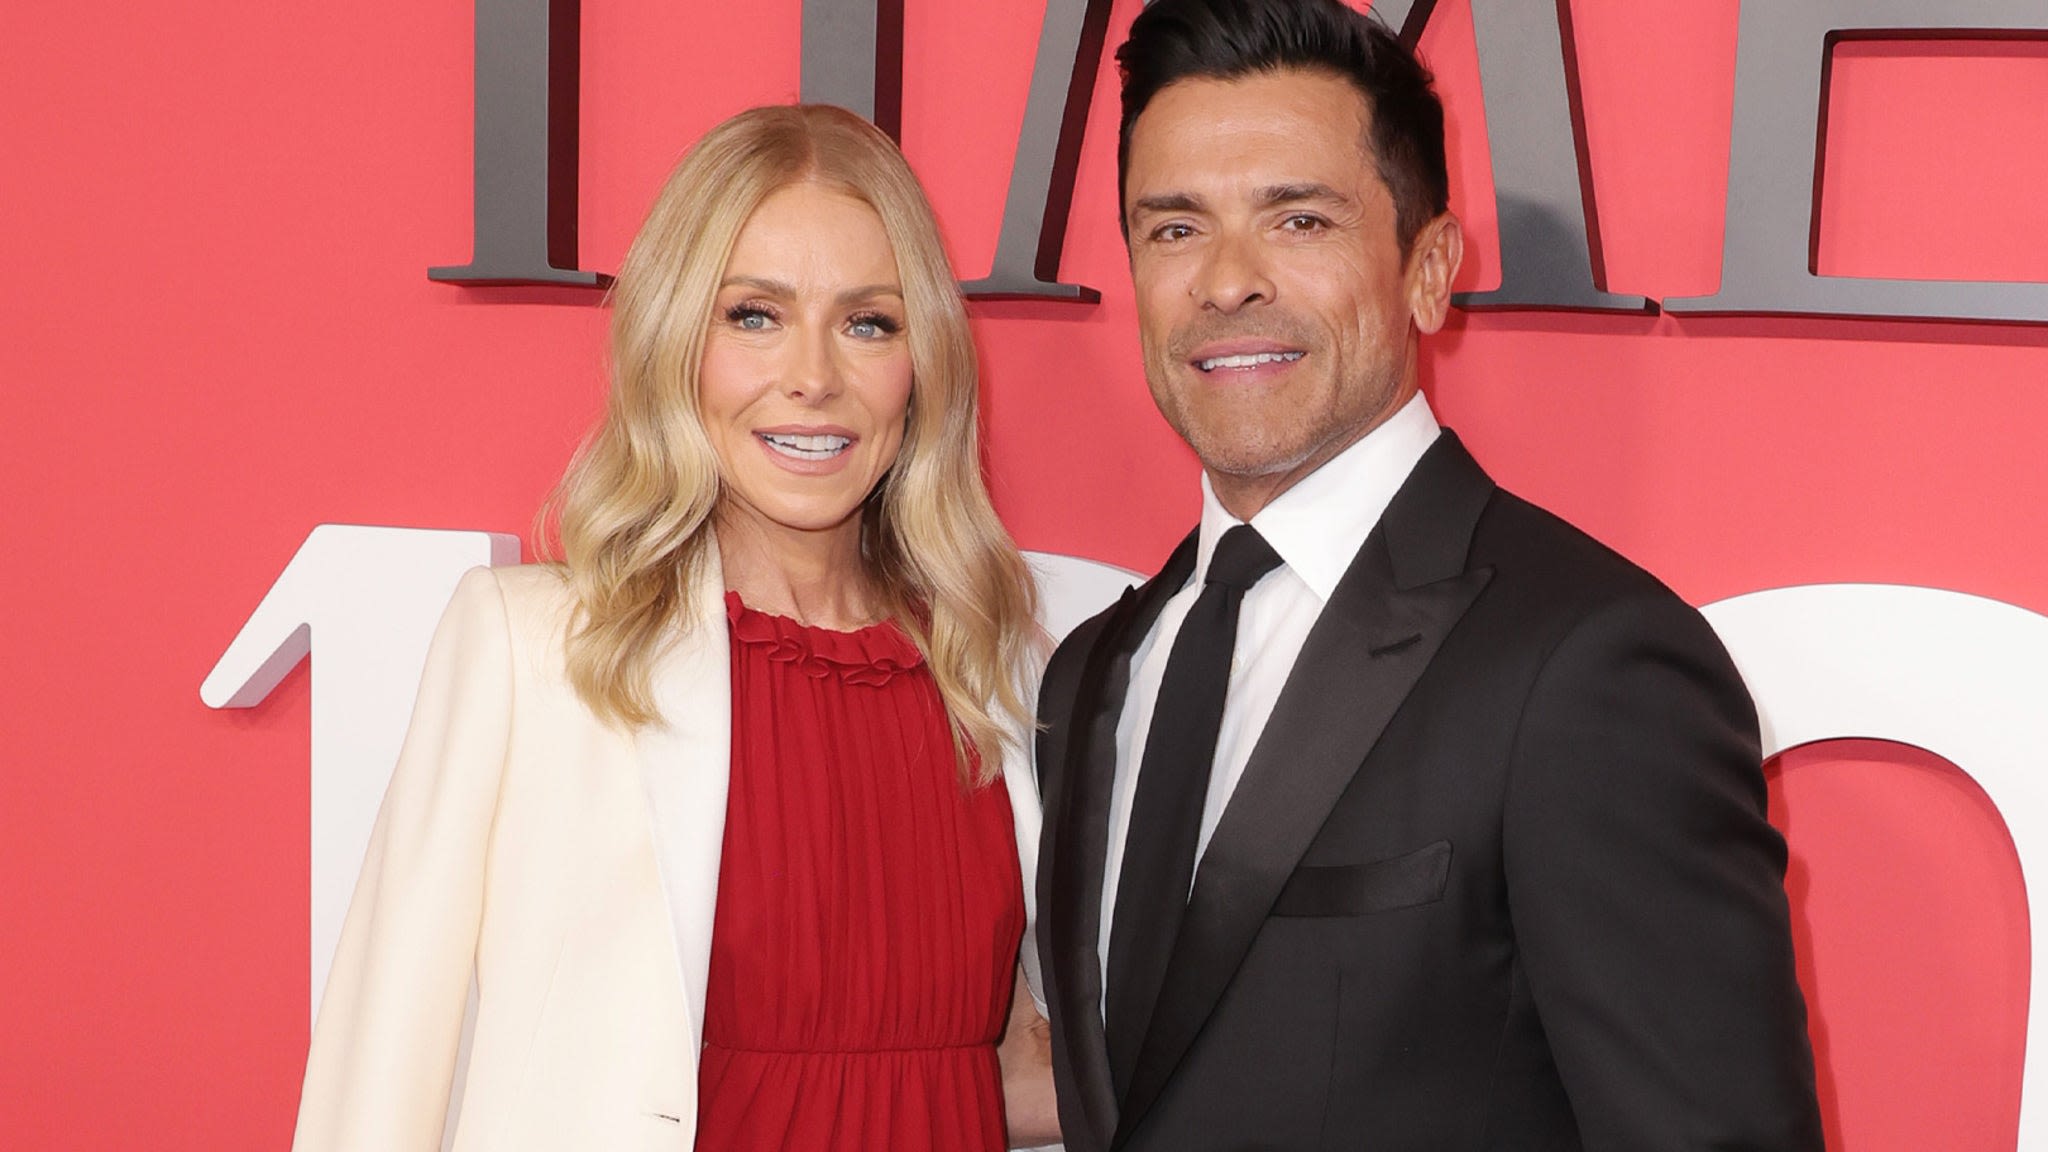 Mark Consuelos Reveals to Kelly Ripa He Recently Kissed Another Woman: 'It Was Passionate'